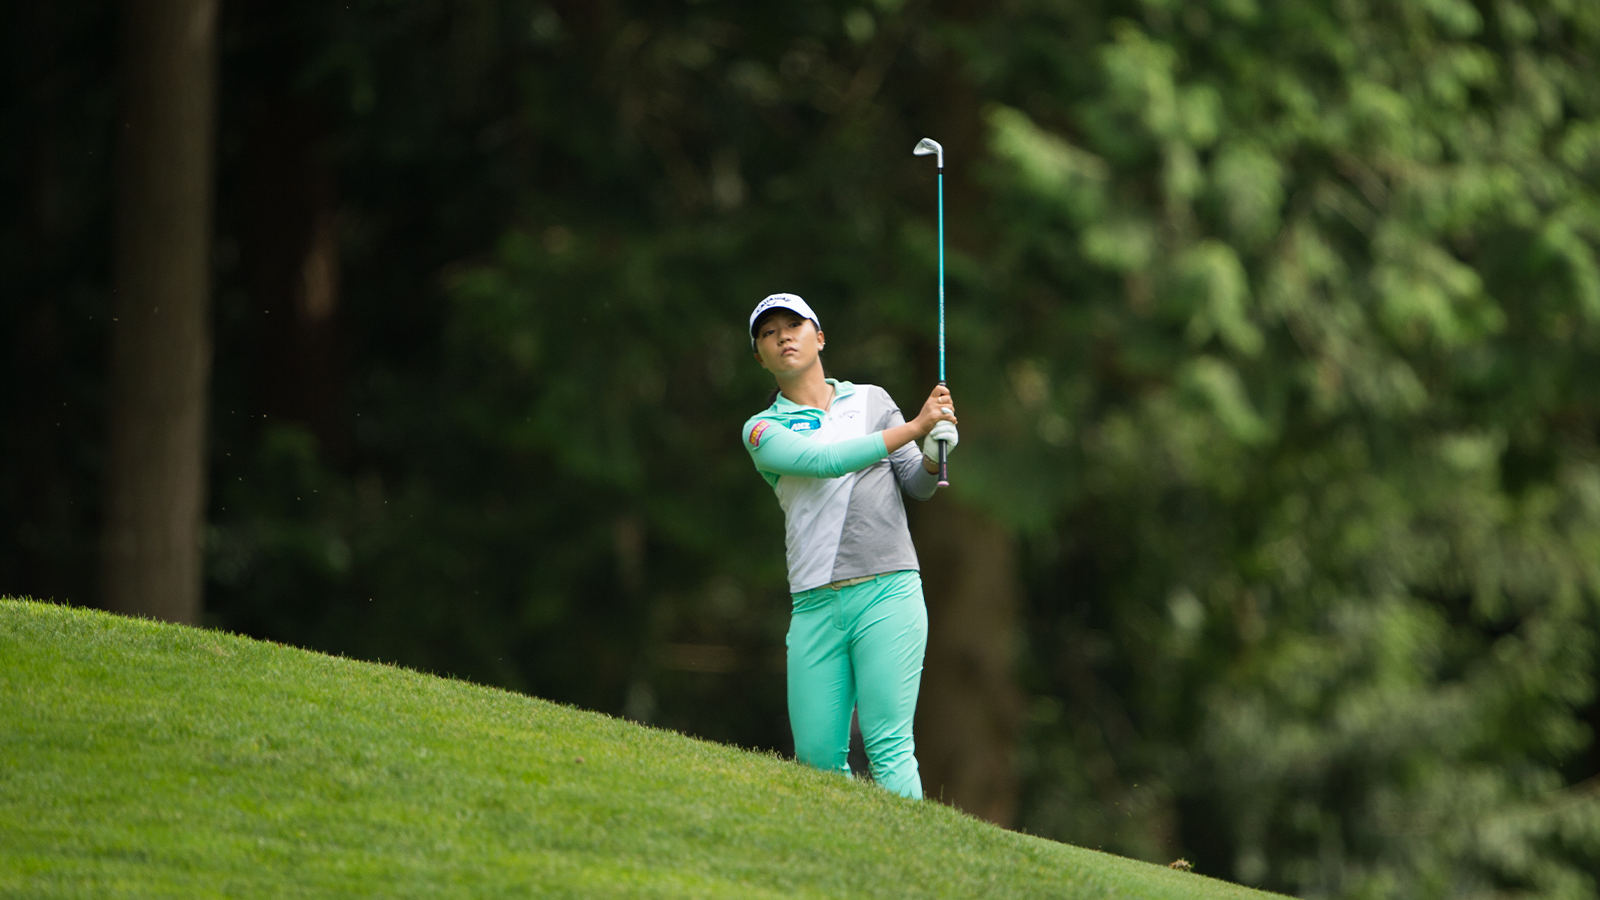 Lydia Ko of New Zealand during the final round of the 2016 KPMG Women’s PGA Championship at the Sahalee Country Club on June 12, 2016 in Sammamish, Washington. (Photo by Montana Pritchard/The PGA of America)